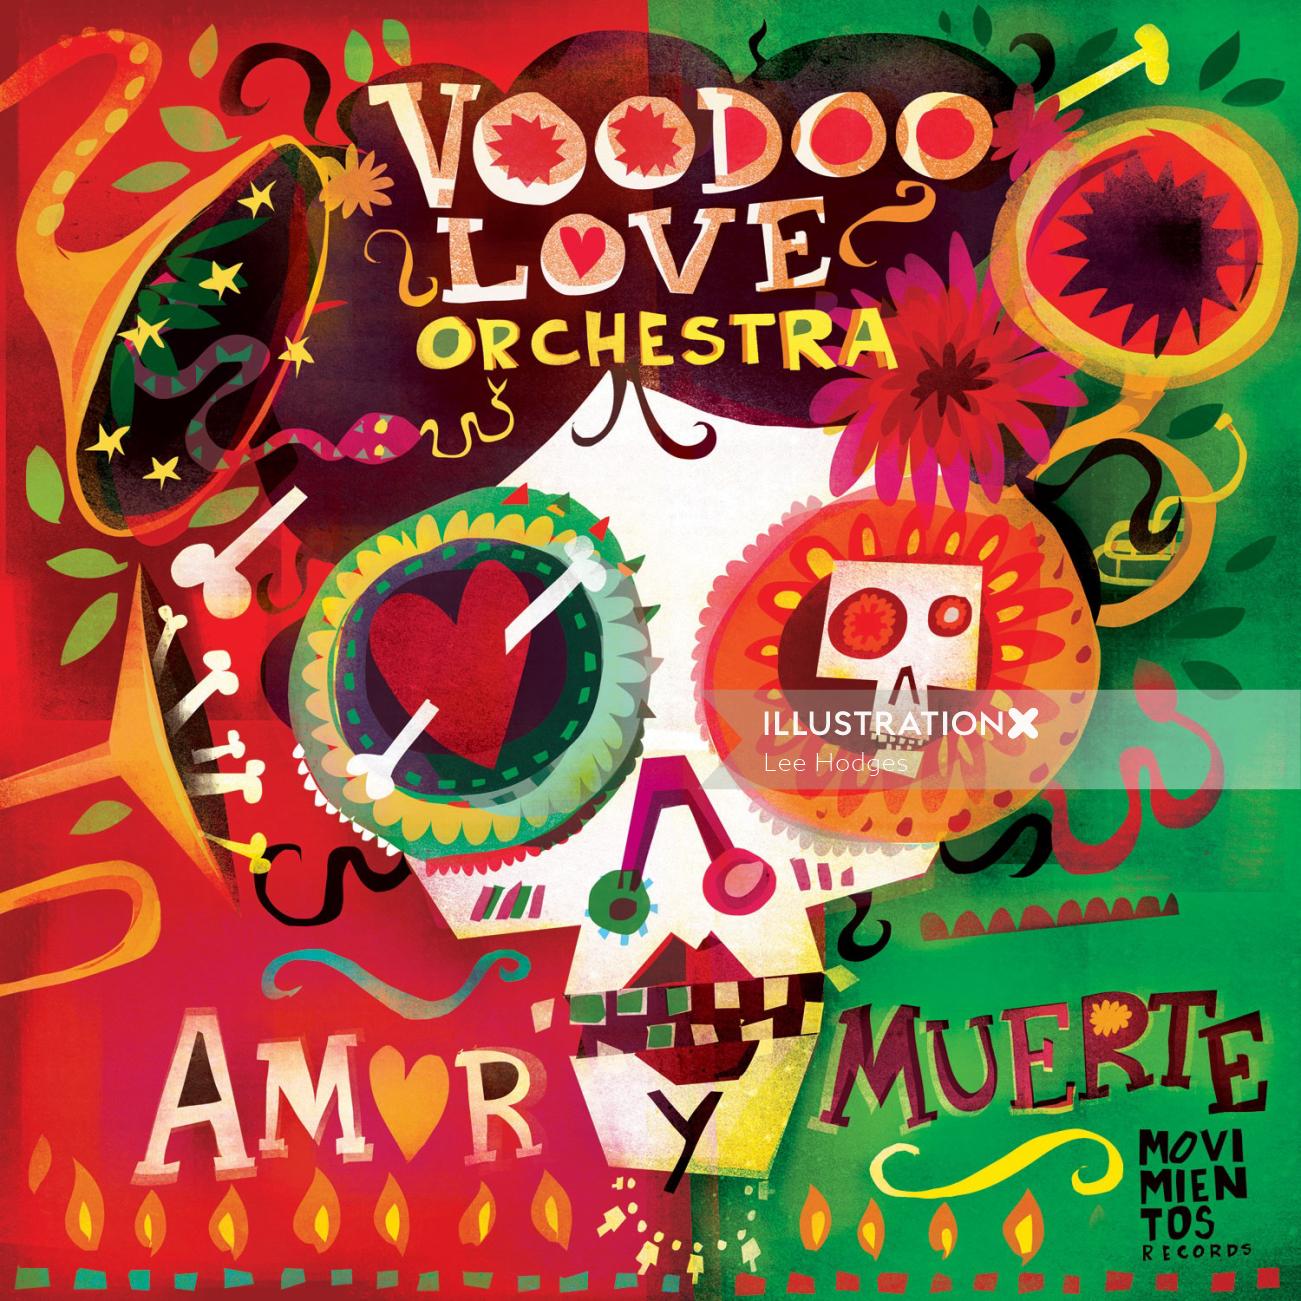 Cover art for Voodoo Love Orchestra album by Lee Hodges